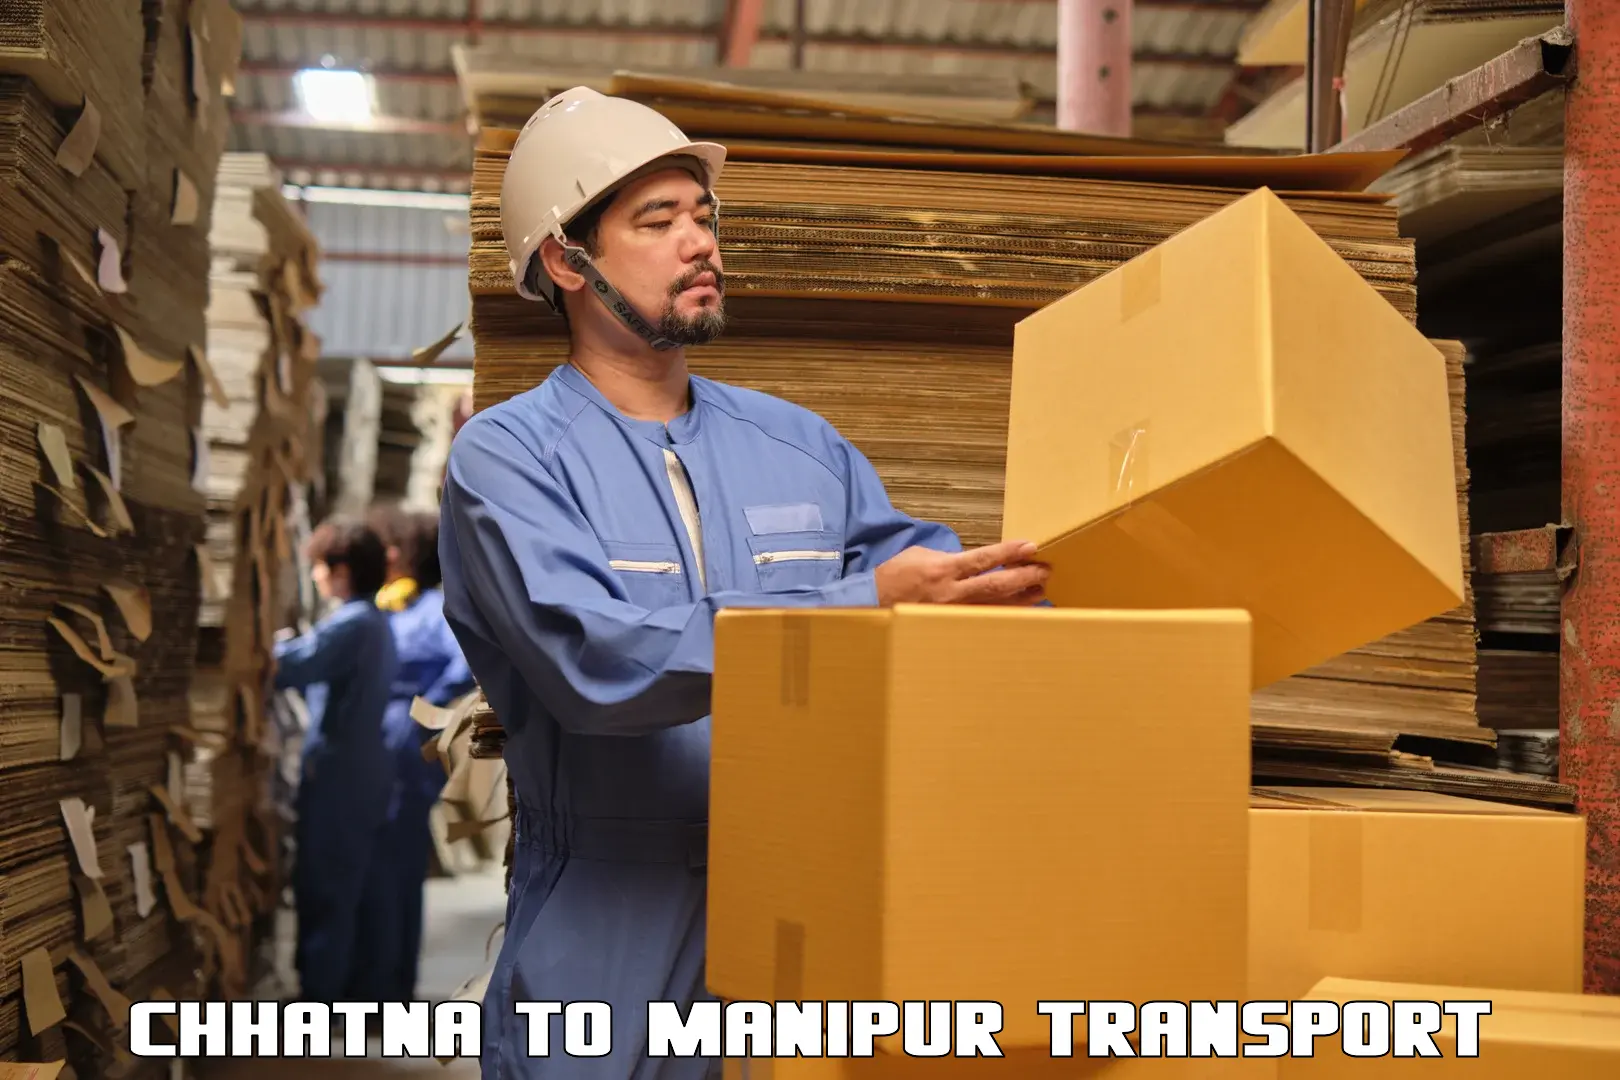 Truck transport companies in India Chhatna to Manipur